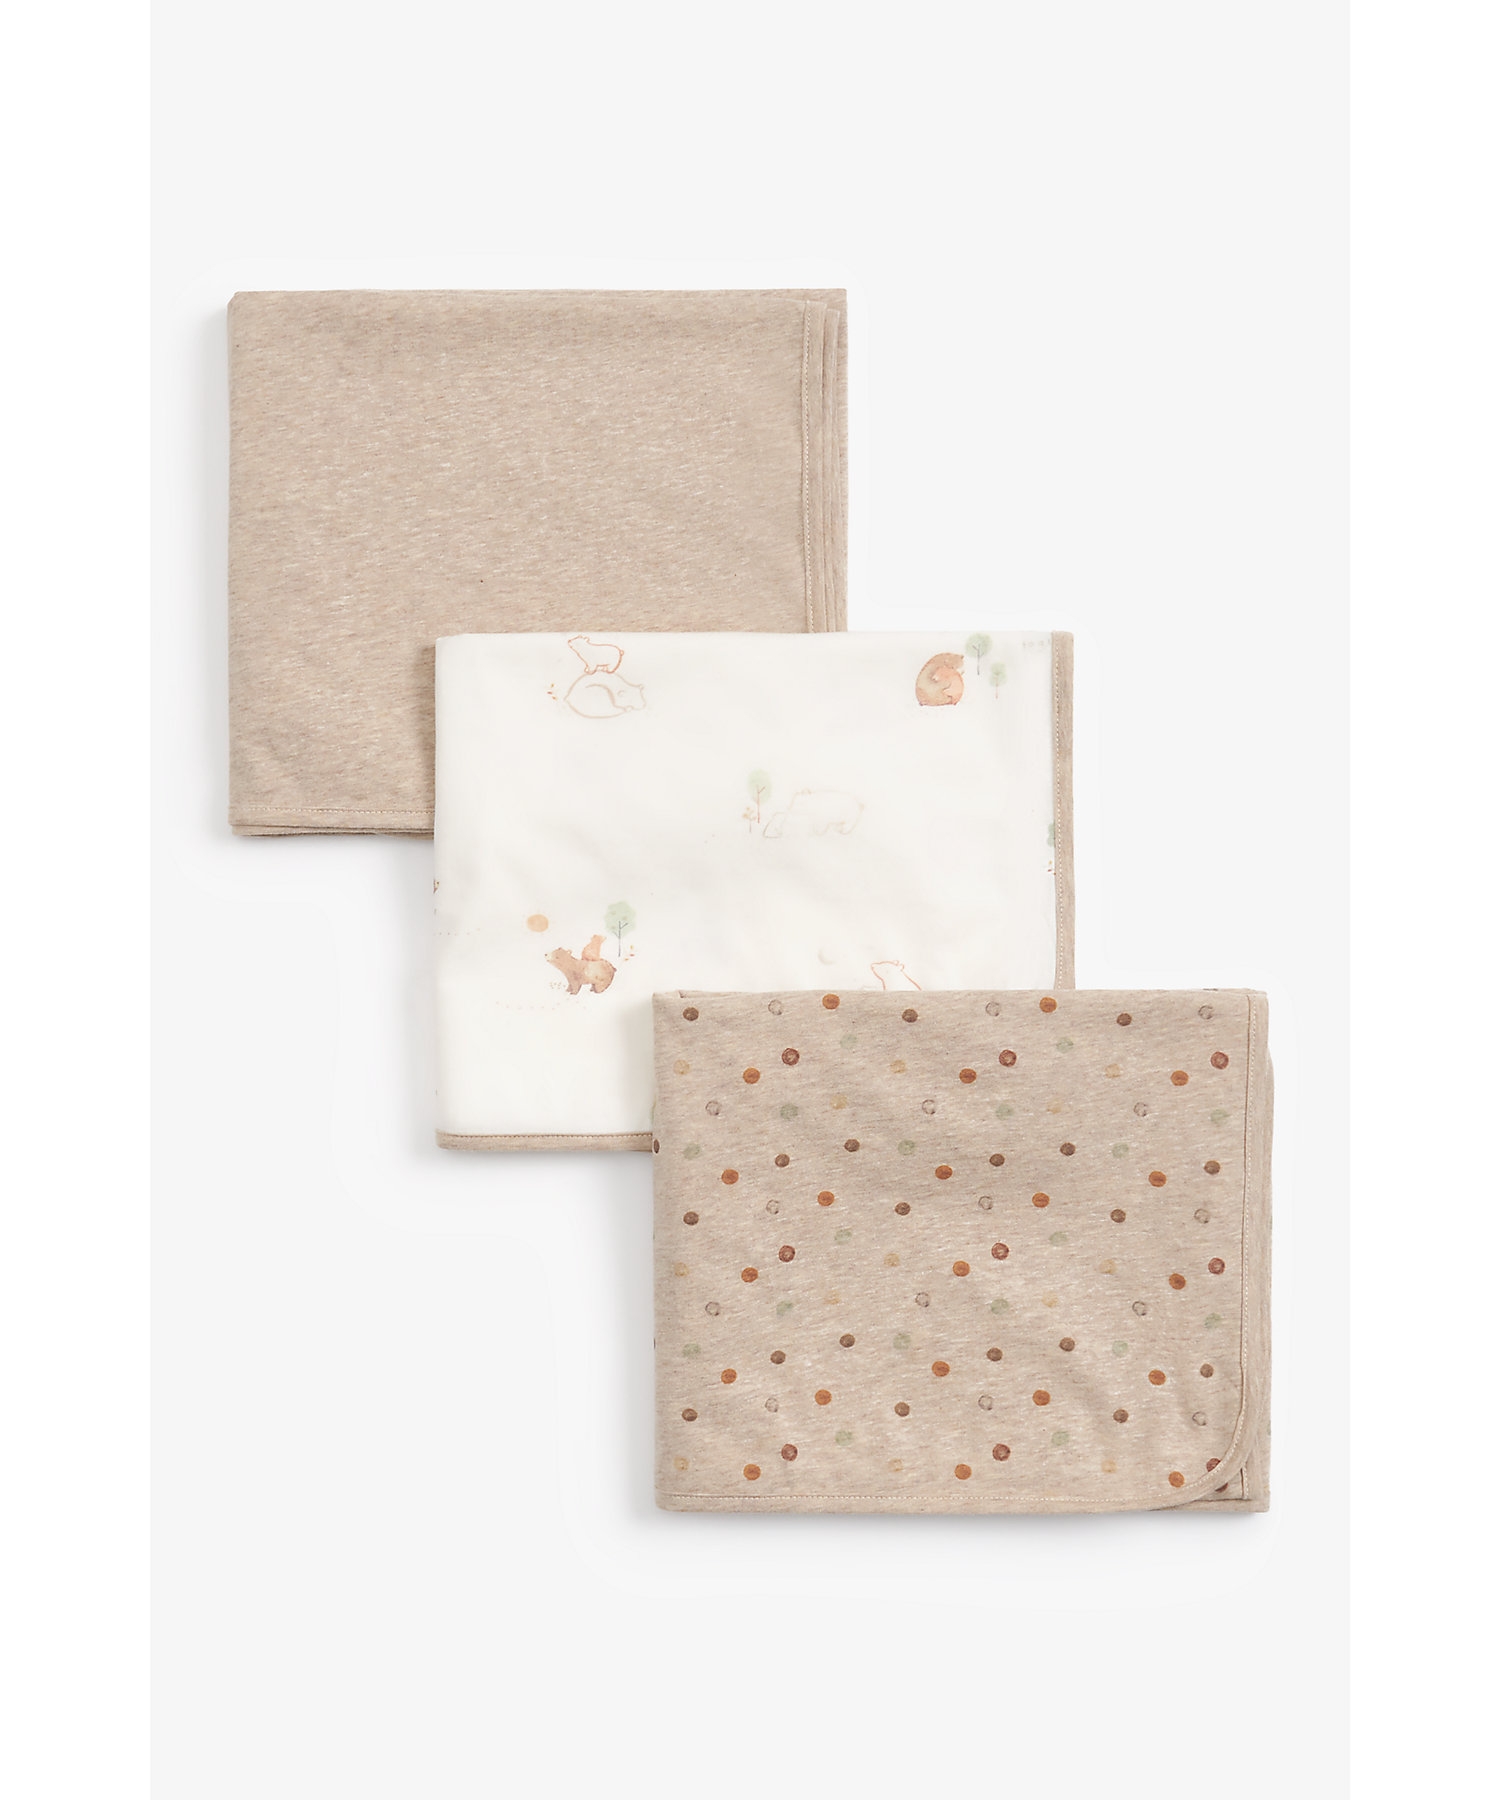 Mothercare | Mothercare Lovable Bear Jersey Blanket Beige Pack of 3 